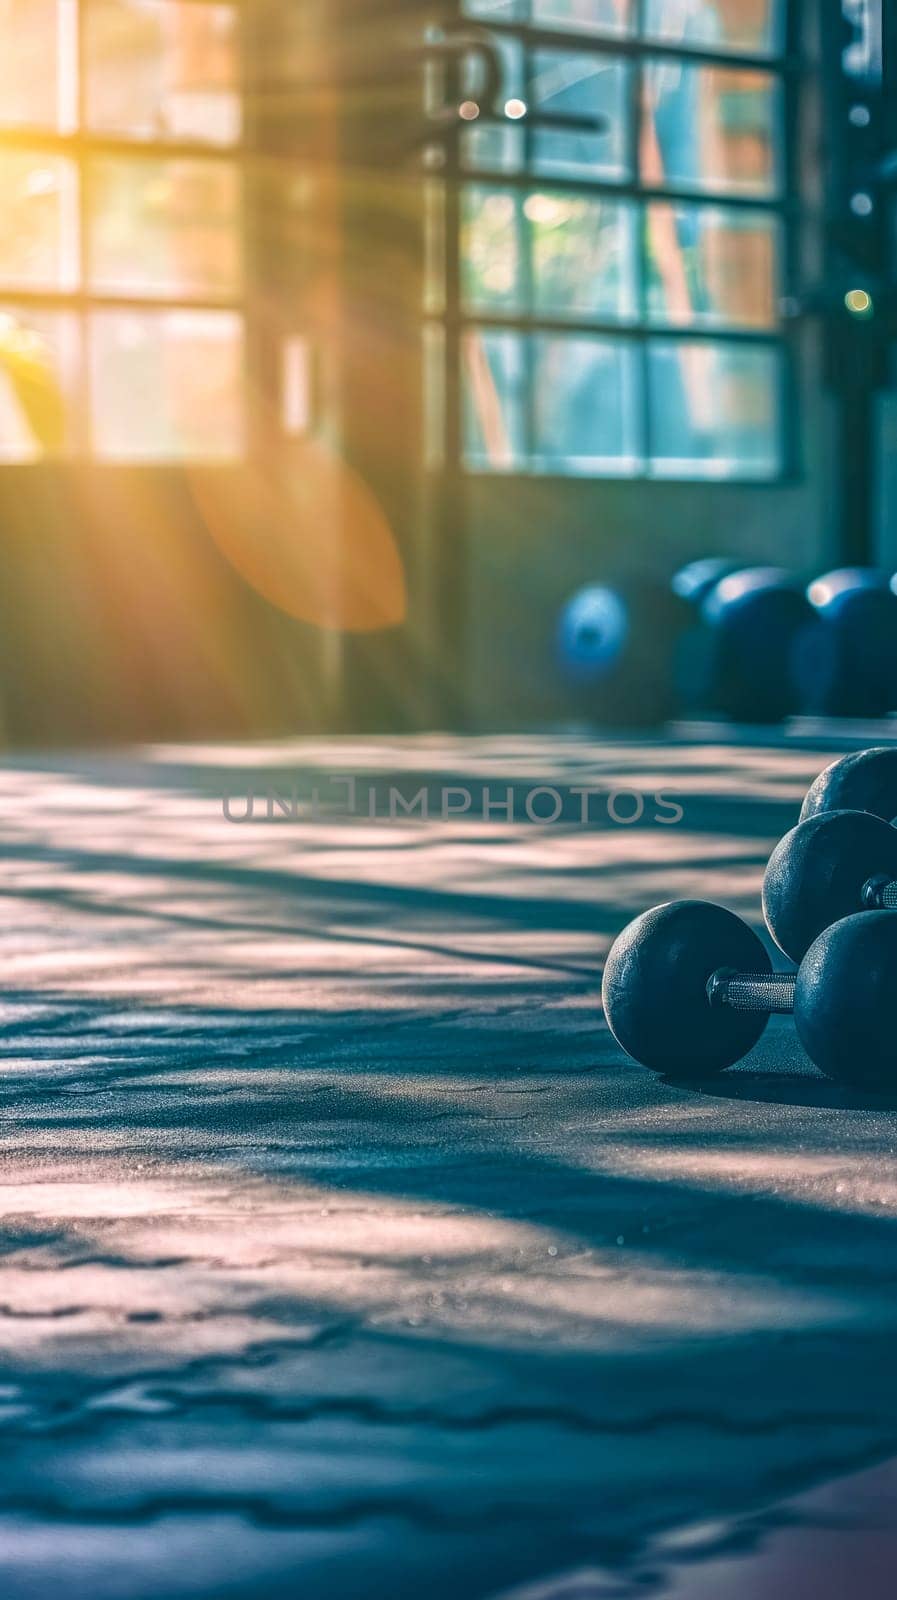 gym during sunrise, with sunlight streaming through the window and casting a warm glow over the dumbbells and textured floor, symbolizing dedication and tranquility in fitness by Edophoto